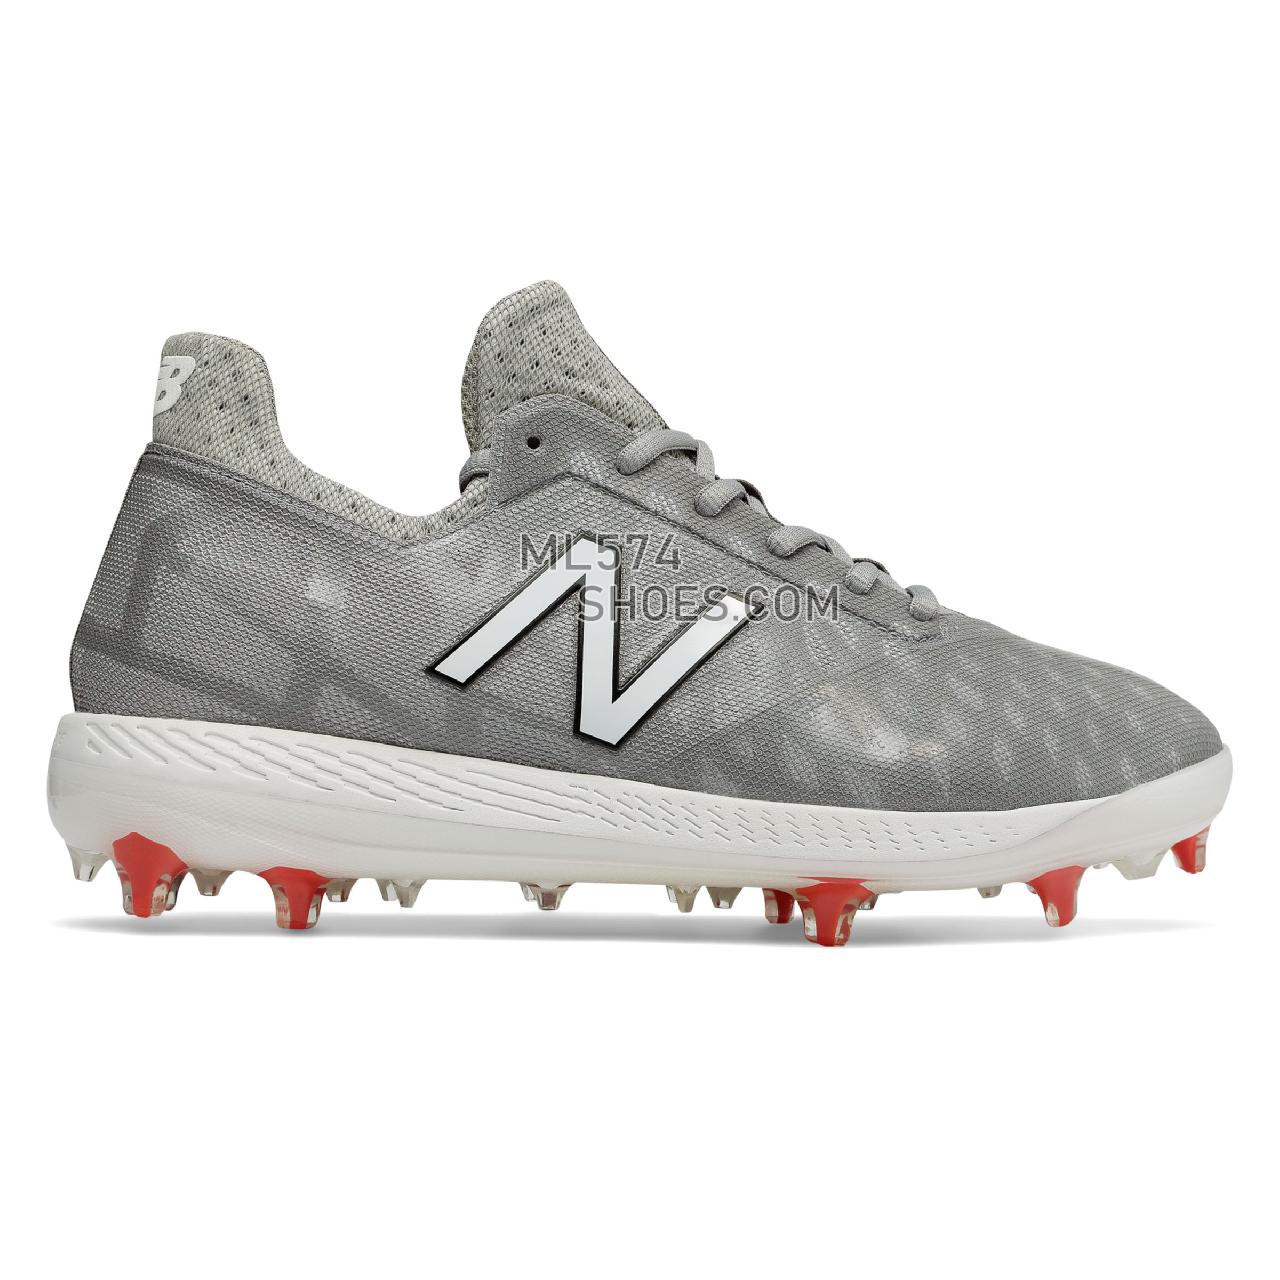 New Balance COMPv1 - Men's 1 - Baseball Grey with White and Red - COMPTG1